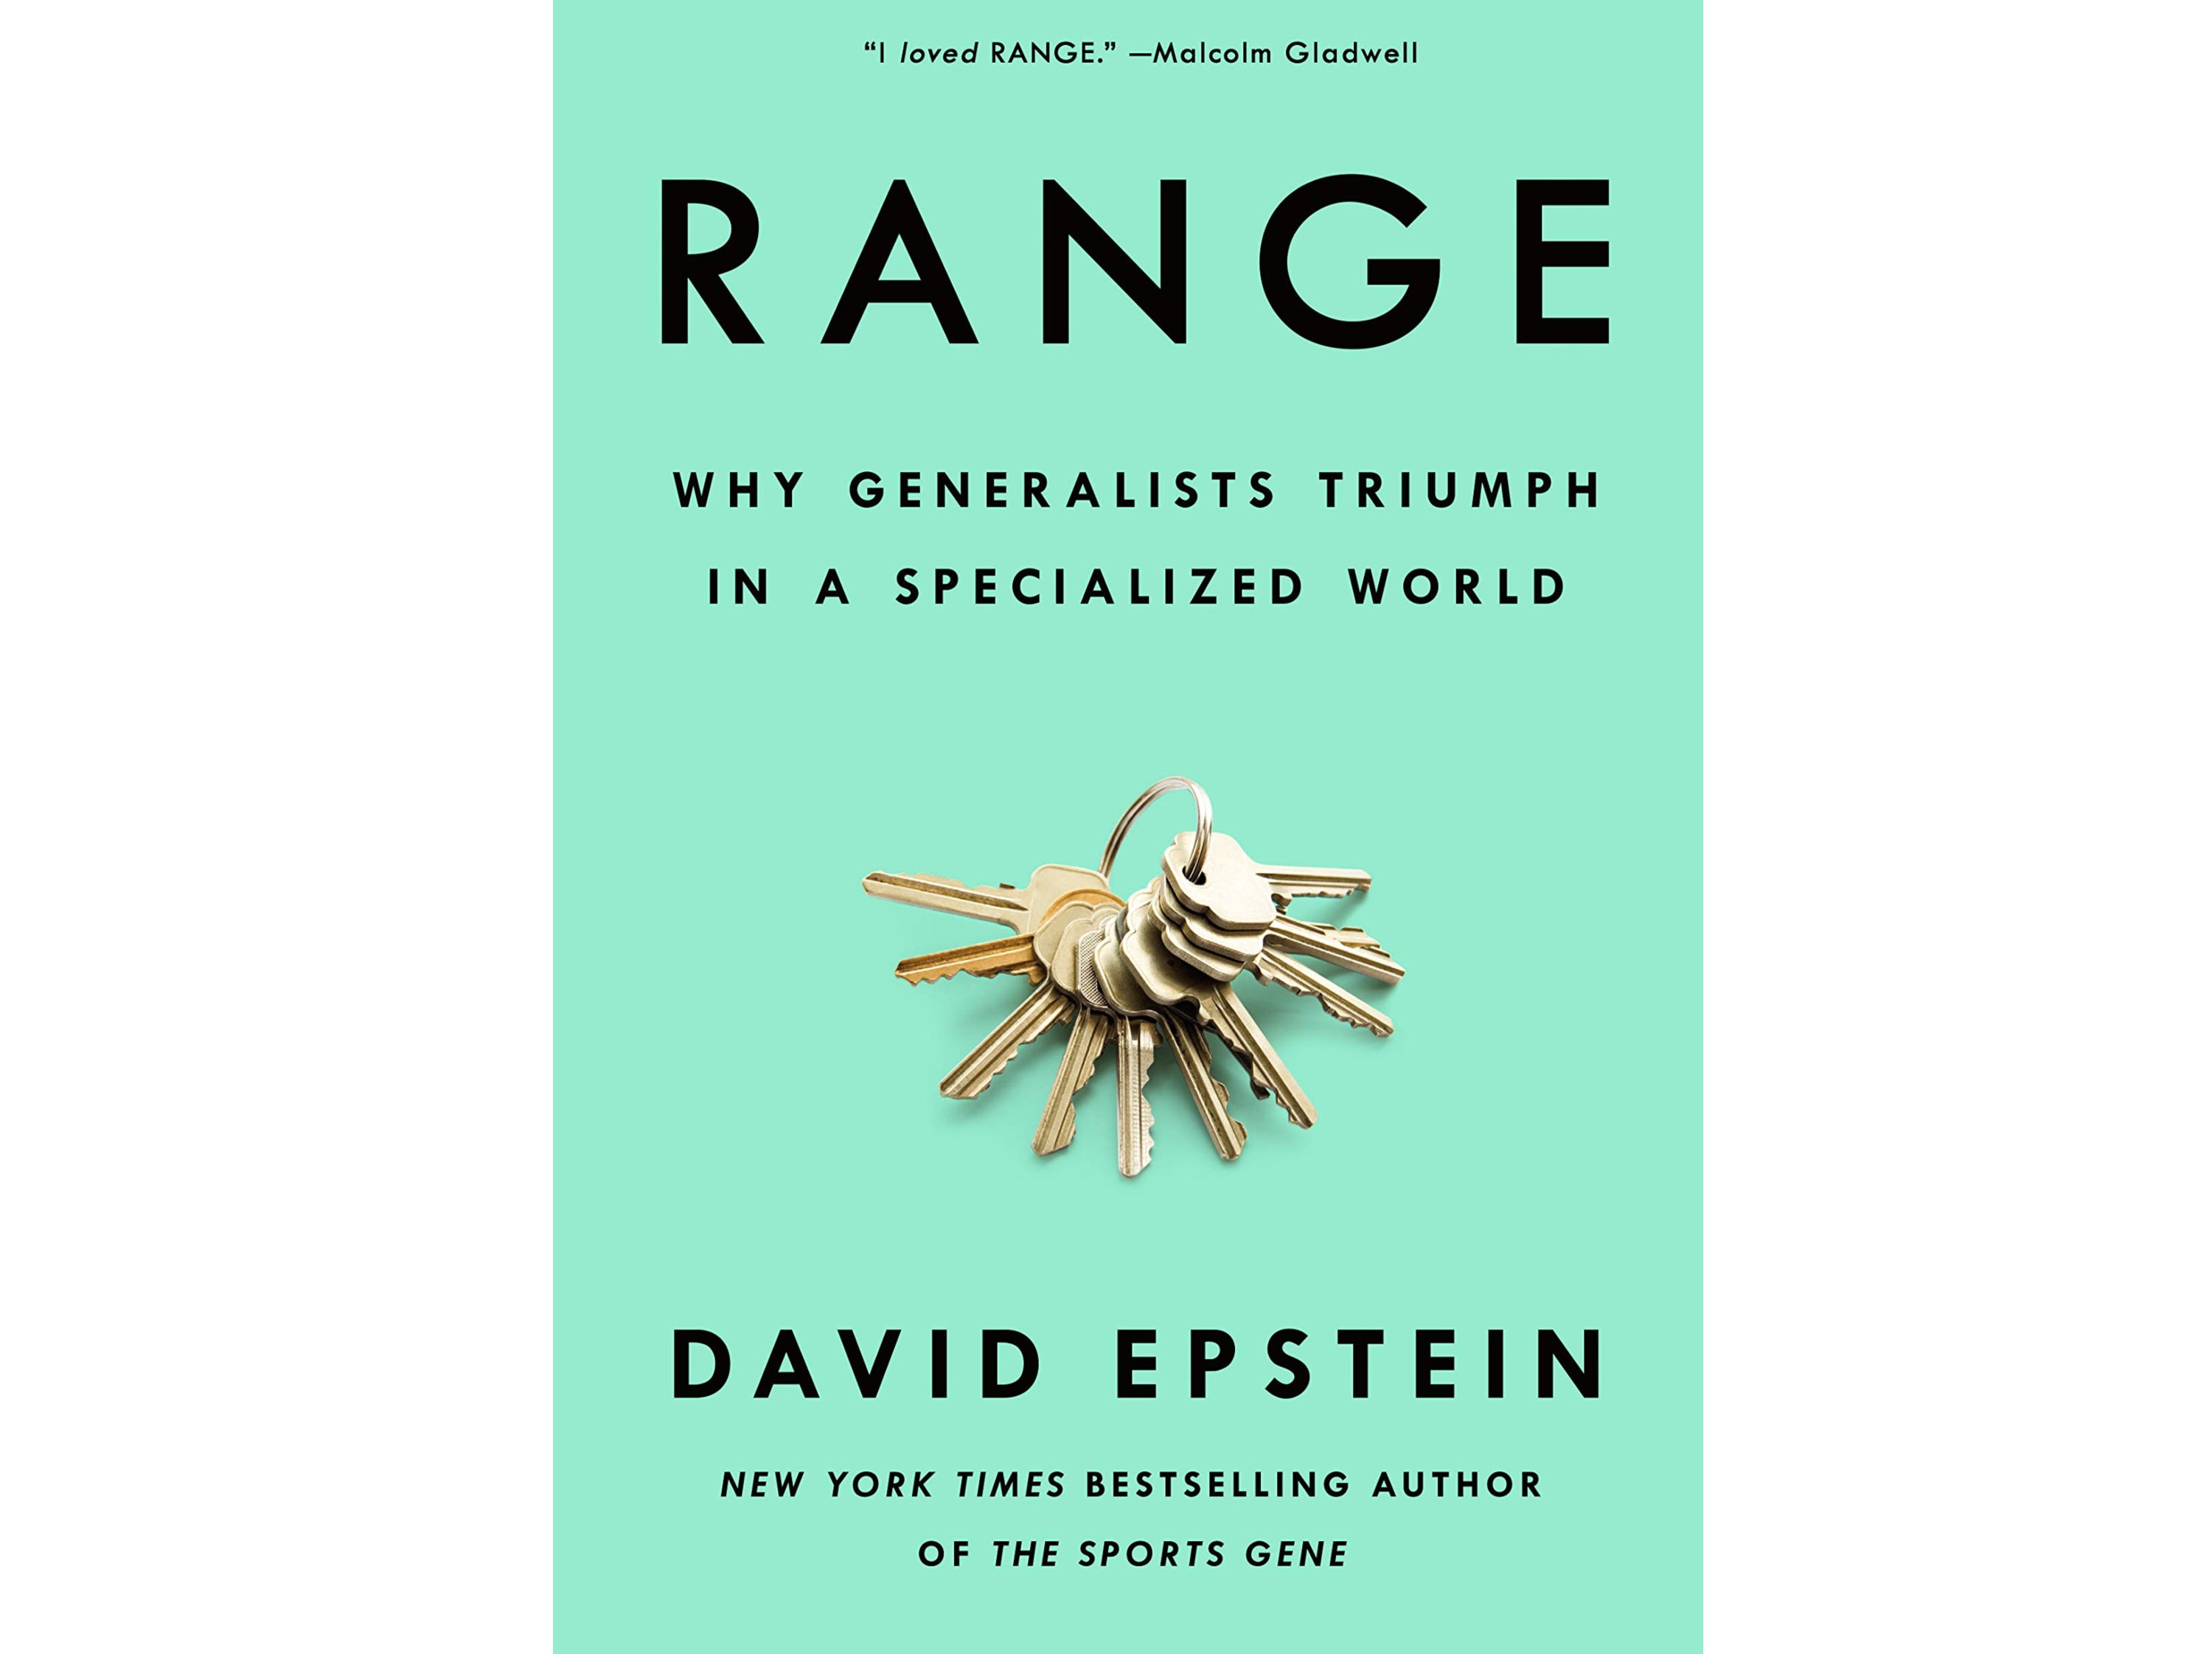 <p>"Range" explores the idea that, though modern work places a premium on specialization, being a generalist is actually the way to go. Gates has <a href="https://www.gatesnotes.com/About-Bill-Gates/Holiday-Books-2020">said</a> Epstein's ideas here "even help explain some of Microsoft's success because we hired people who had real breadth within their field and across domains."</p>